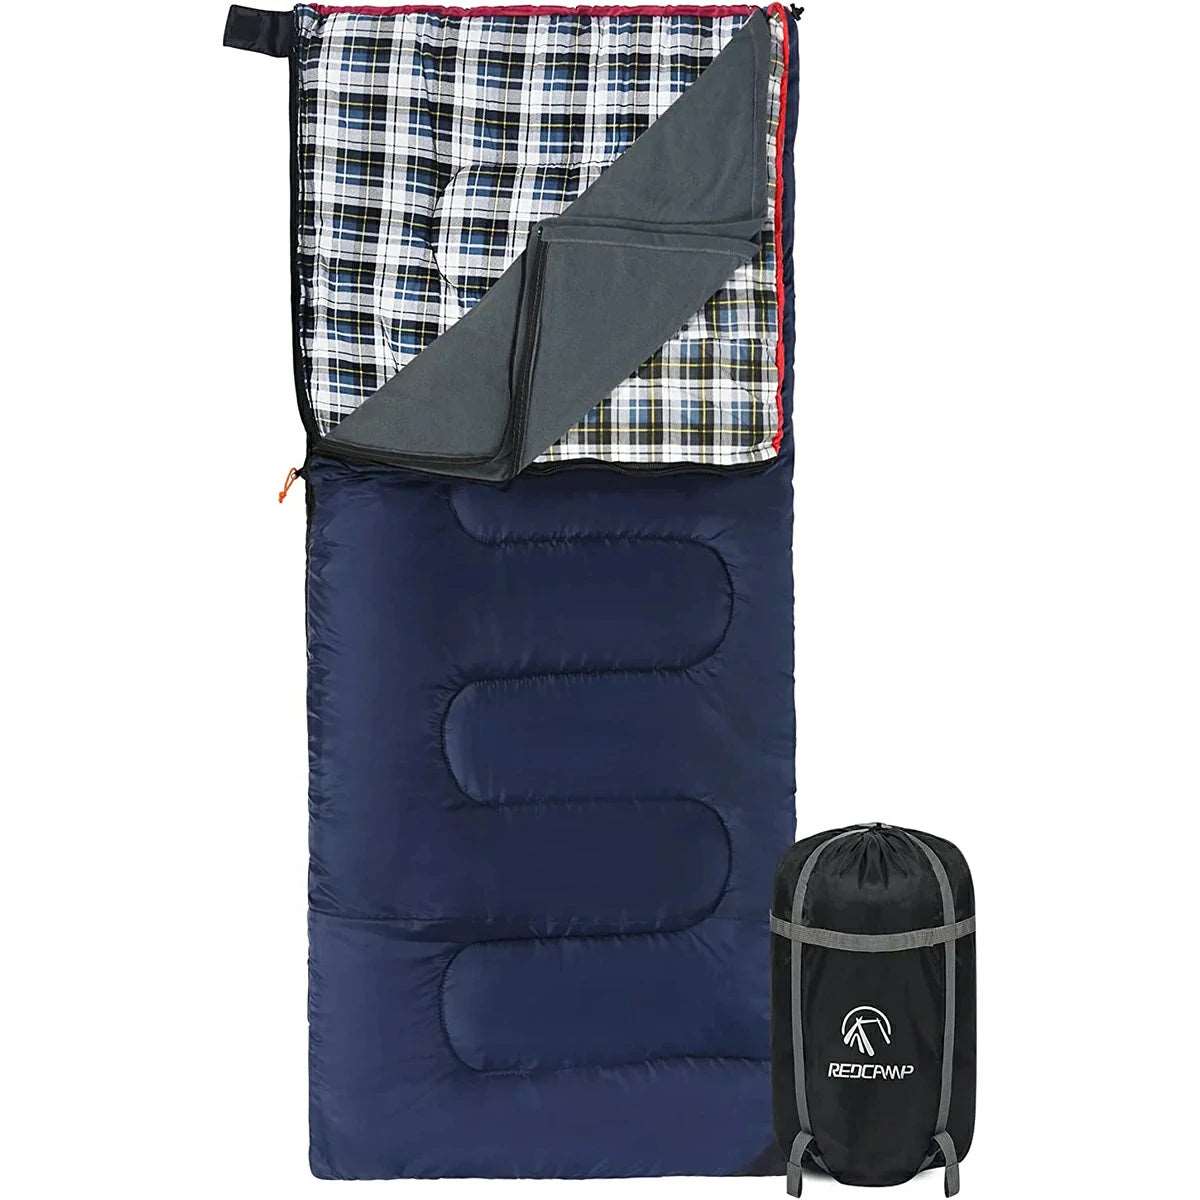 CottonFlannelSleepingBagforCampingwith2-3-4lbsFilling